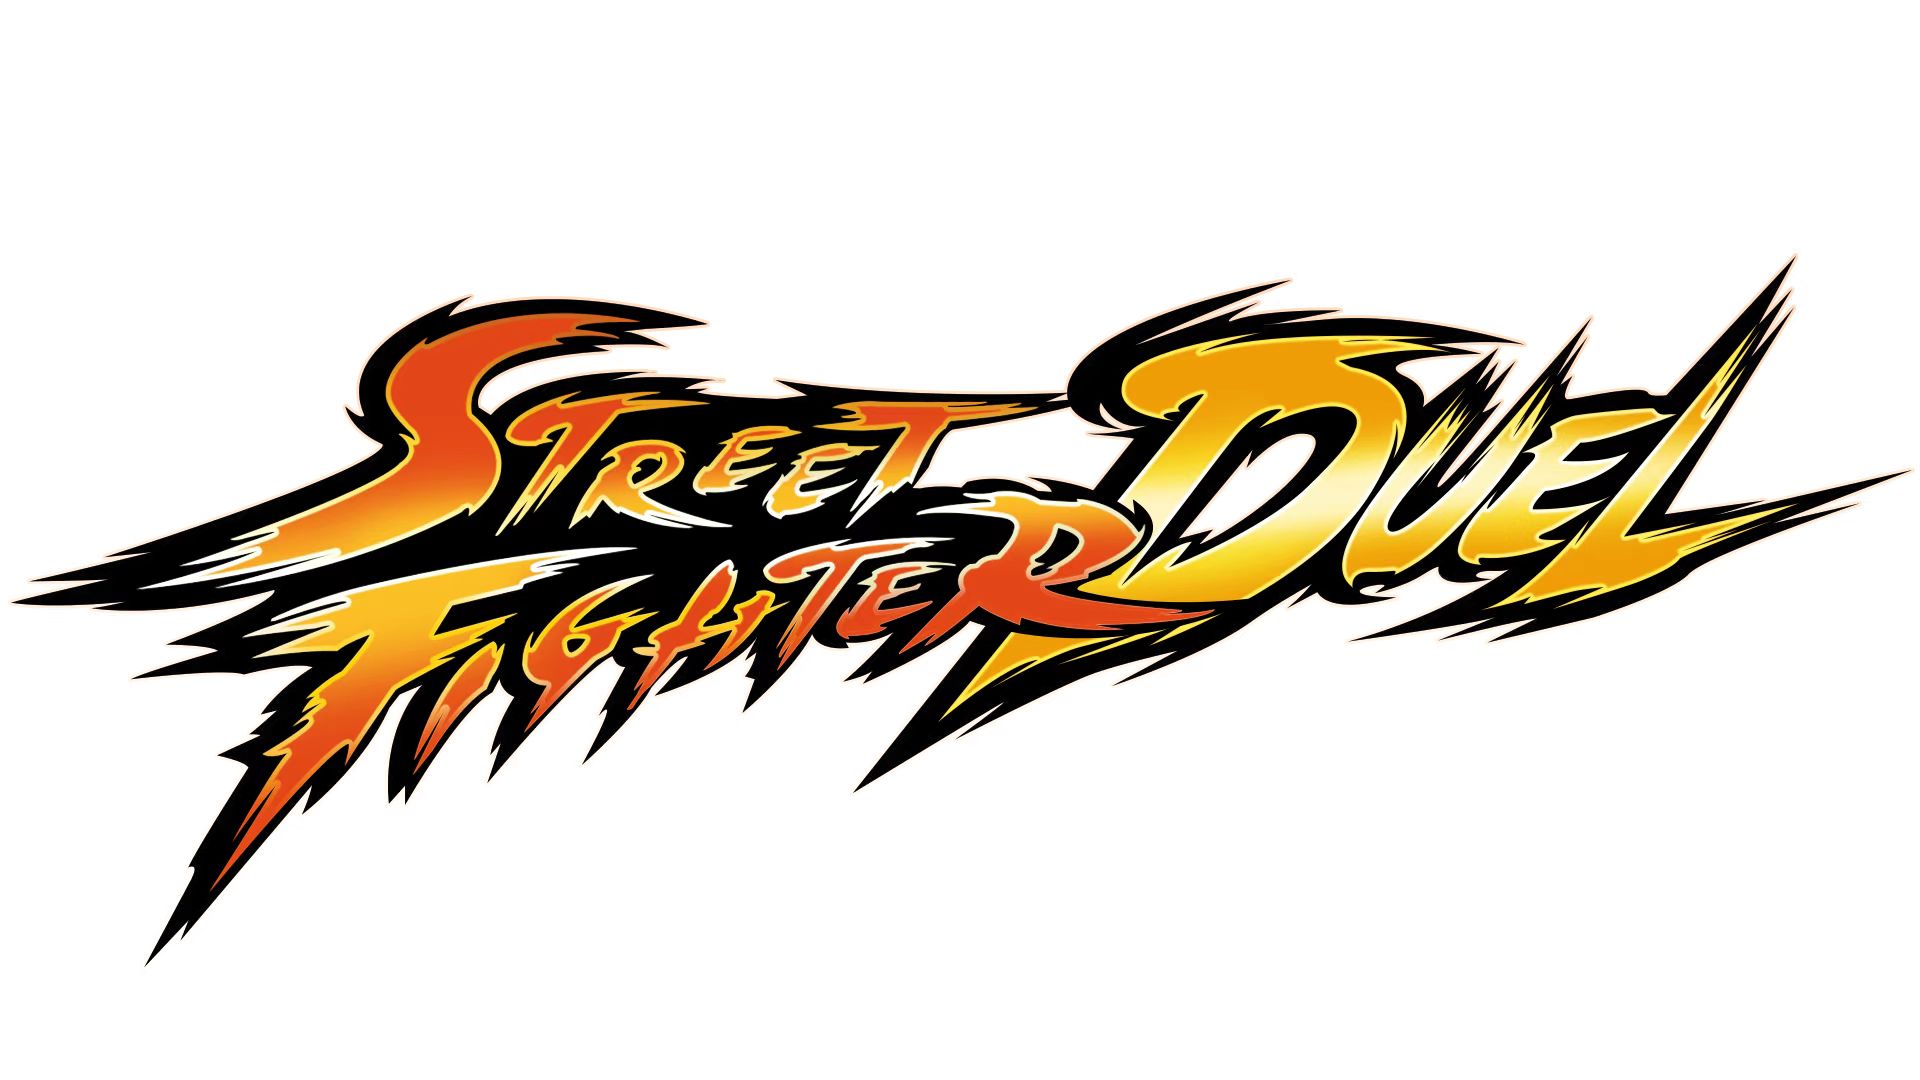 Street Fighter Duel Help Centre home page